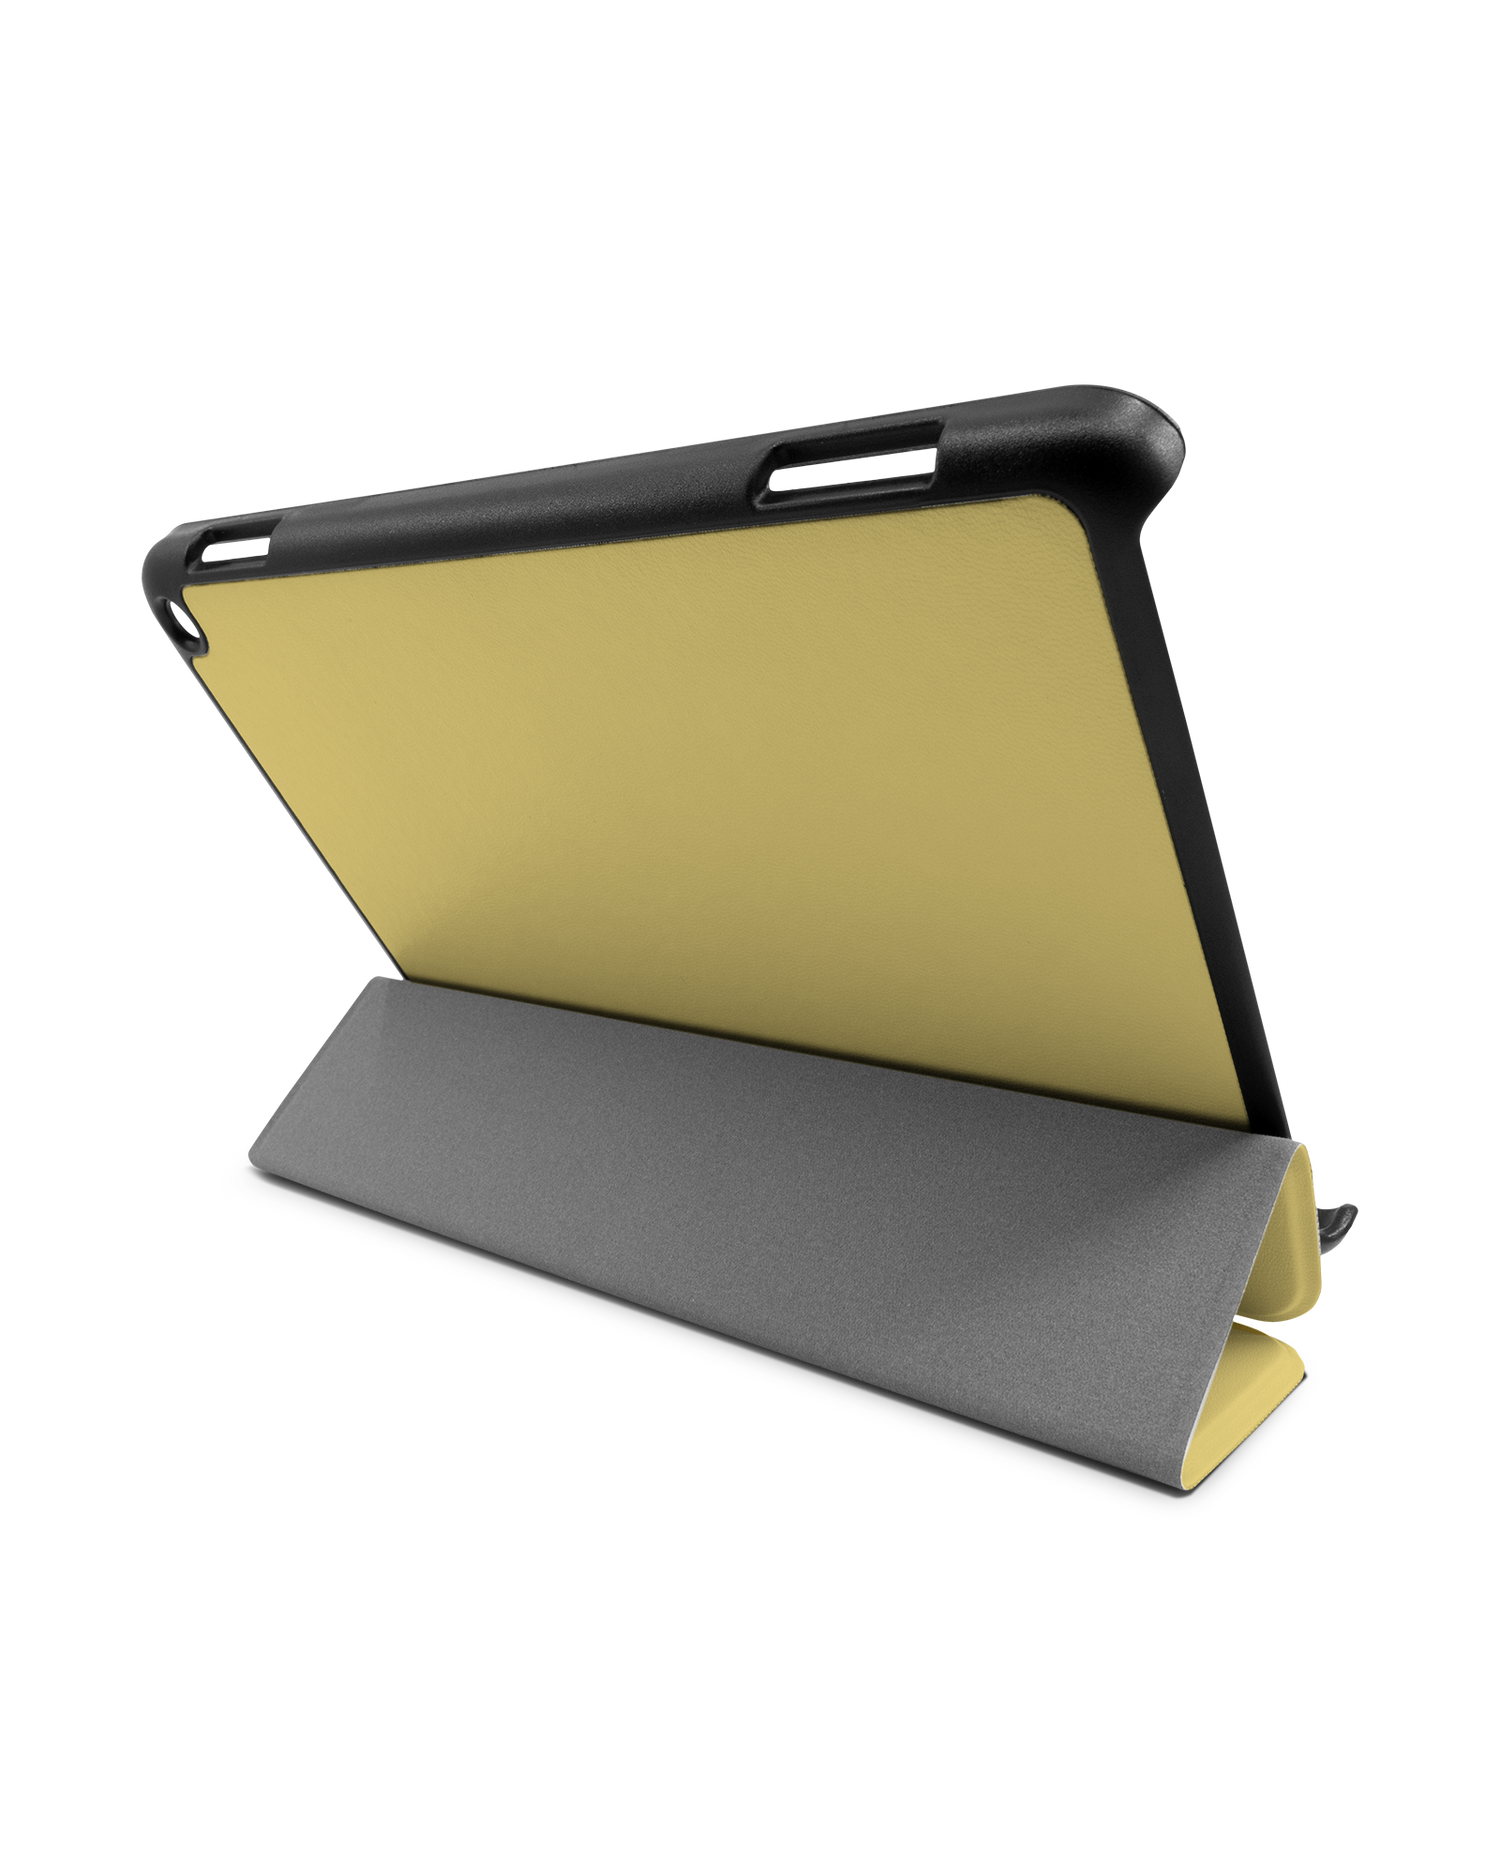 LIGHT YELLOW Tablet Smart Case for Amazon Fire HD 8 (2022), Amazon Fire HD 8 Plus (2022), Amazon Fire HD 8 (2020), Amazon Fire HD 8 Plus (2020): Used as Stand